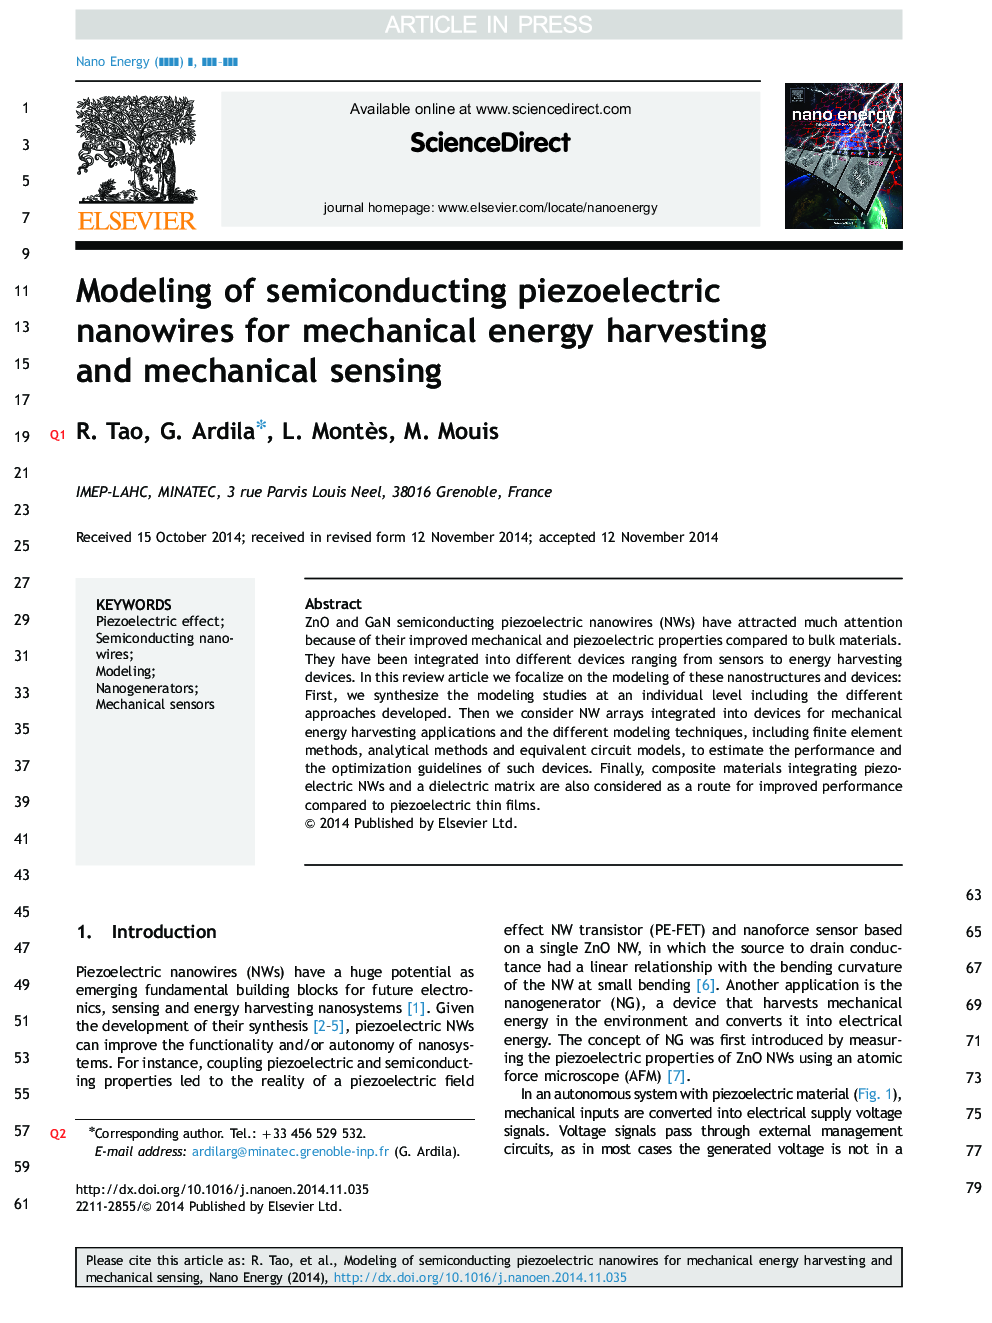 Modeling of semiconducting piezoelectric nanowires for mechanical energy harvesting and mechanical sensing